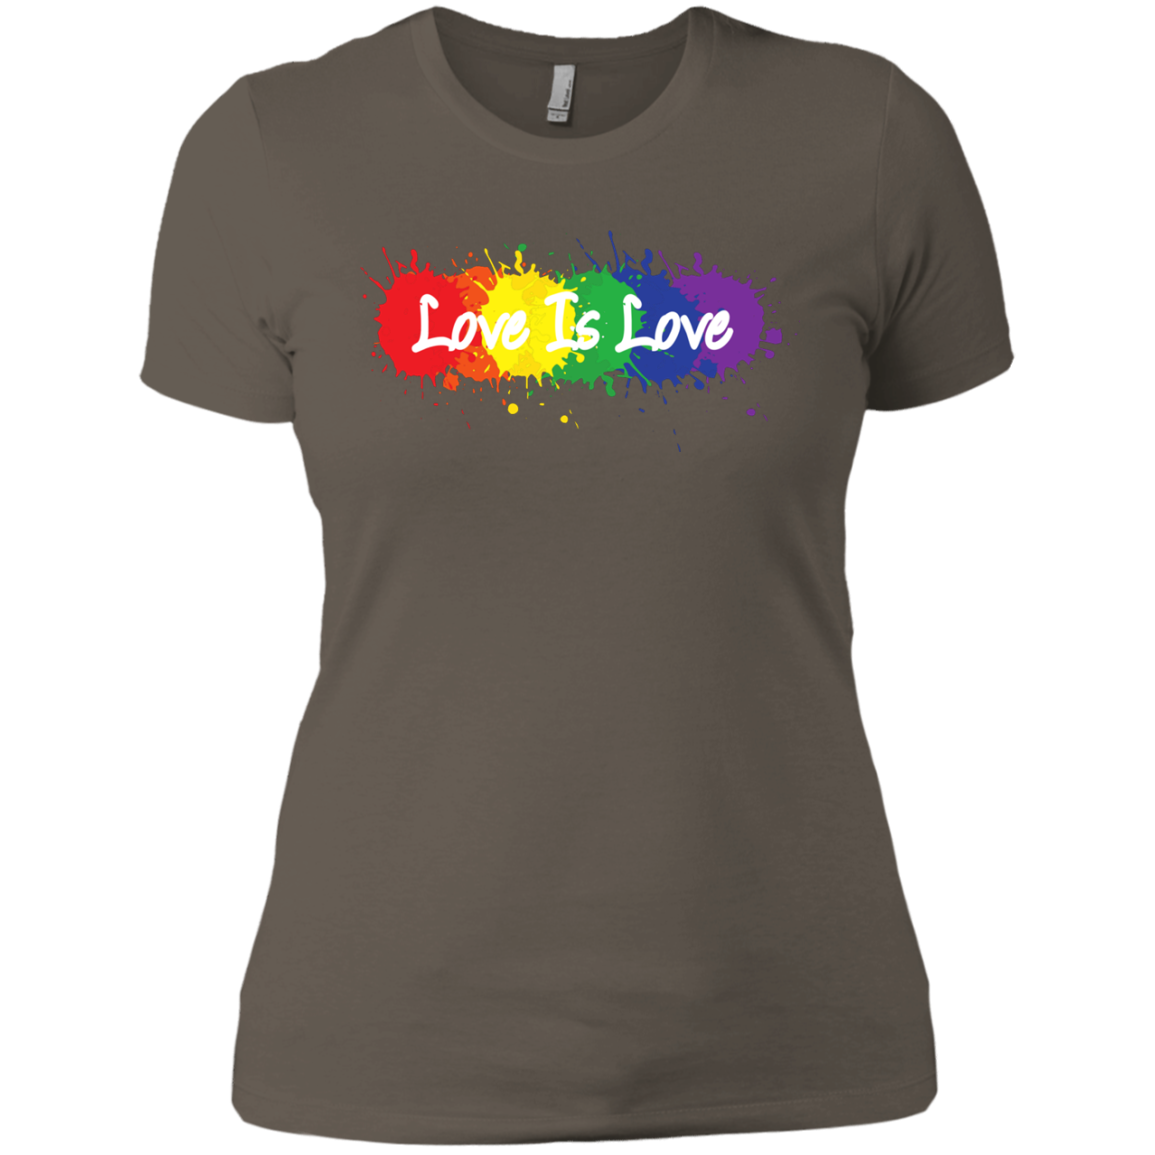  "Love is Love" T Shirt for women LGBT Pride Equality tshirt for women